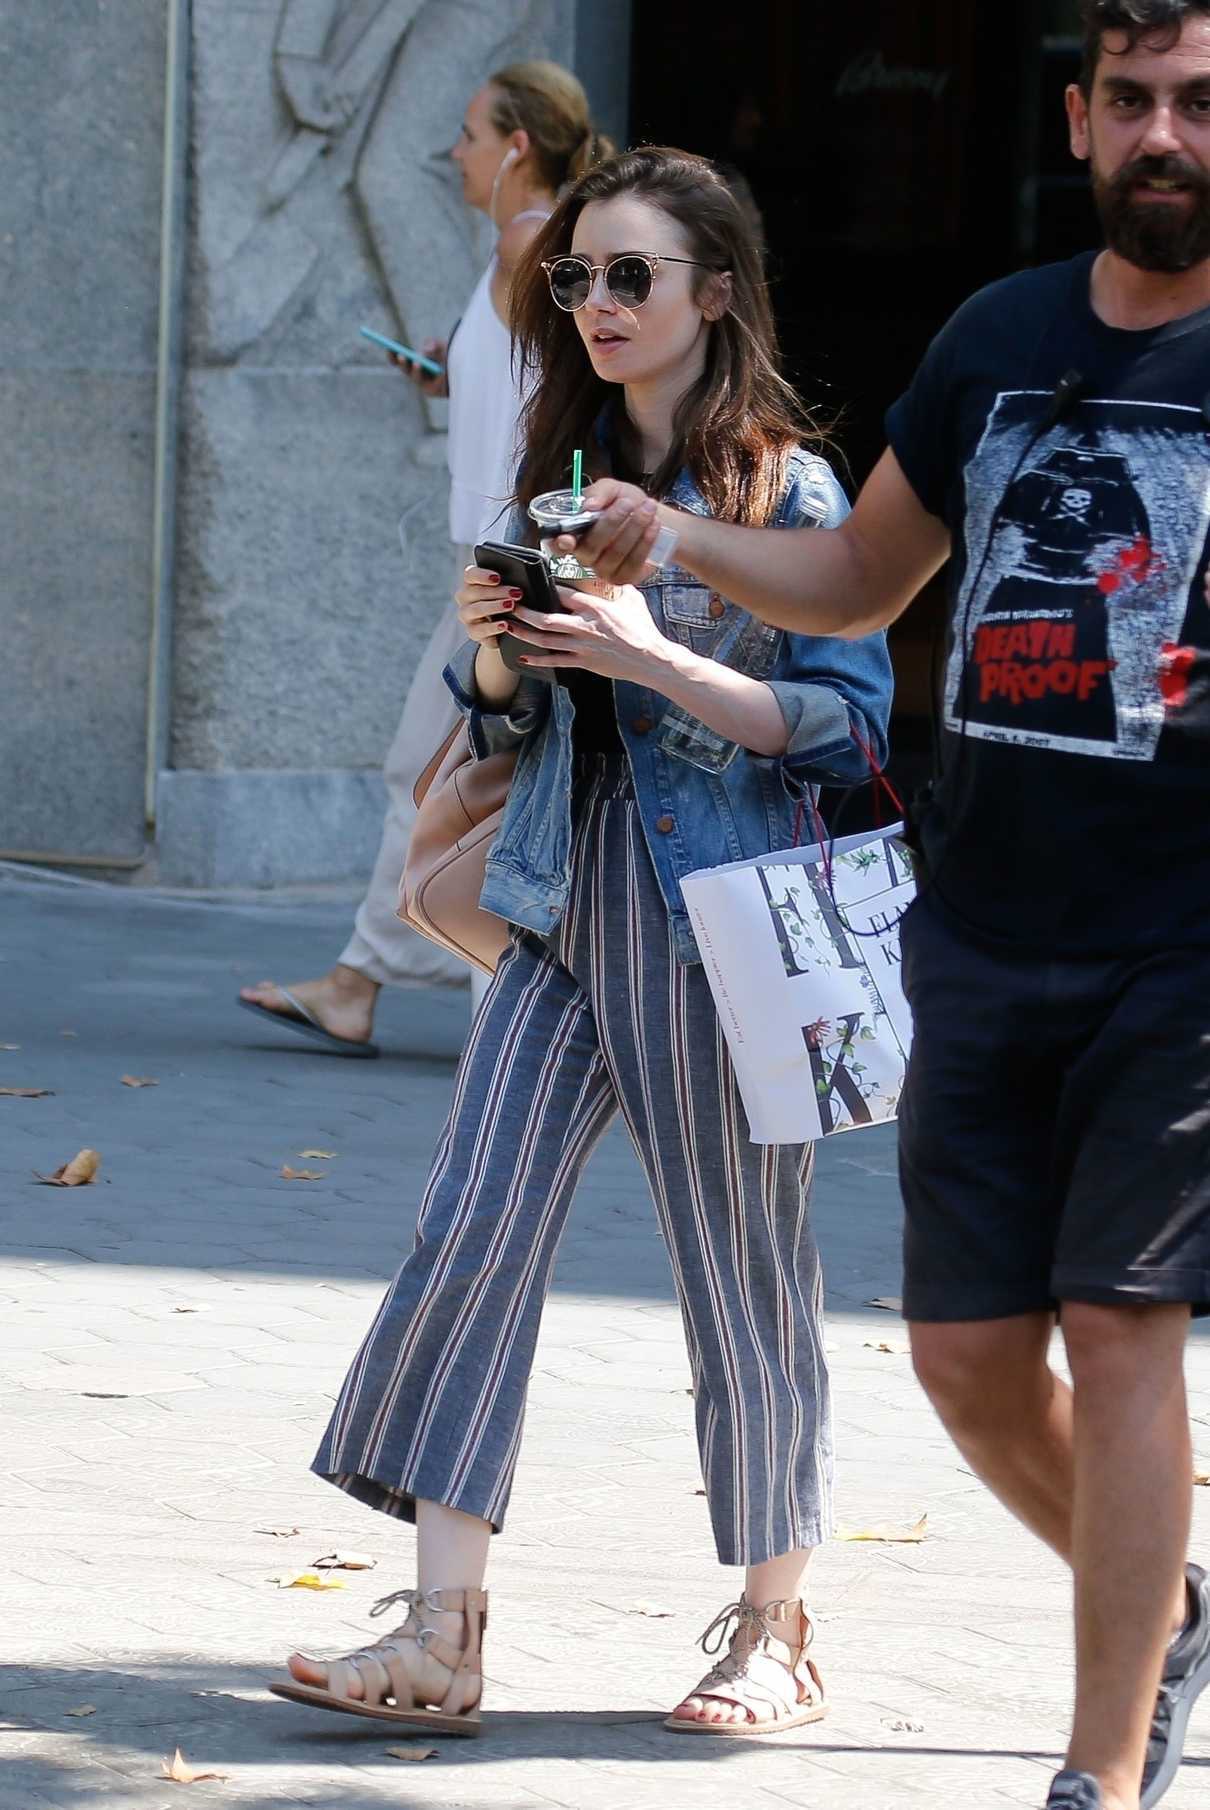 The 29-year-old actress Lily Collins was spotted out in Barcelona.-3